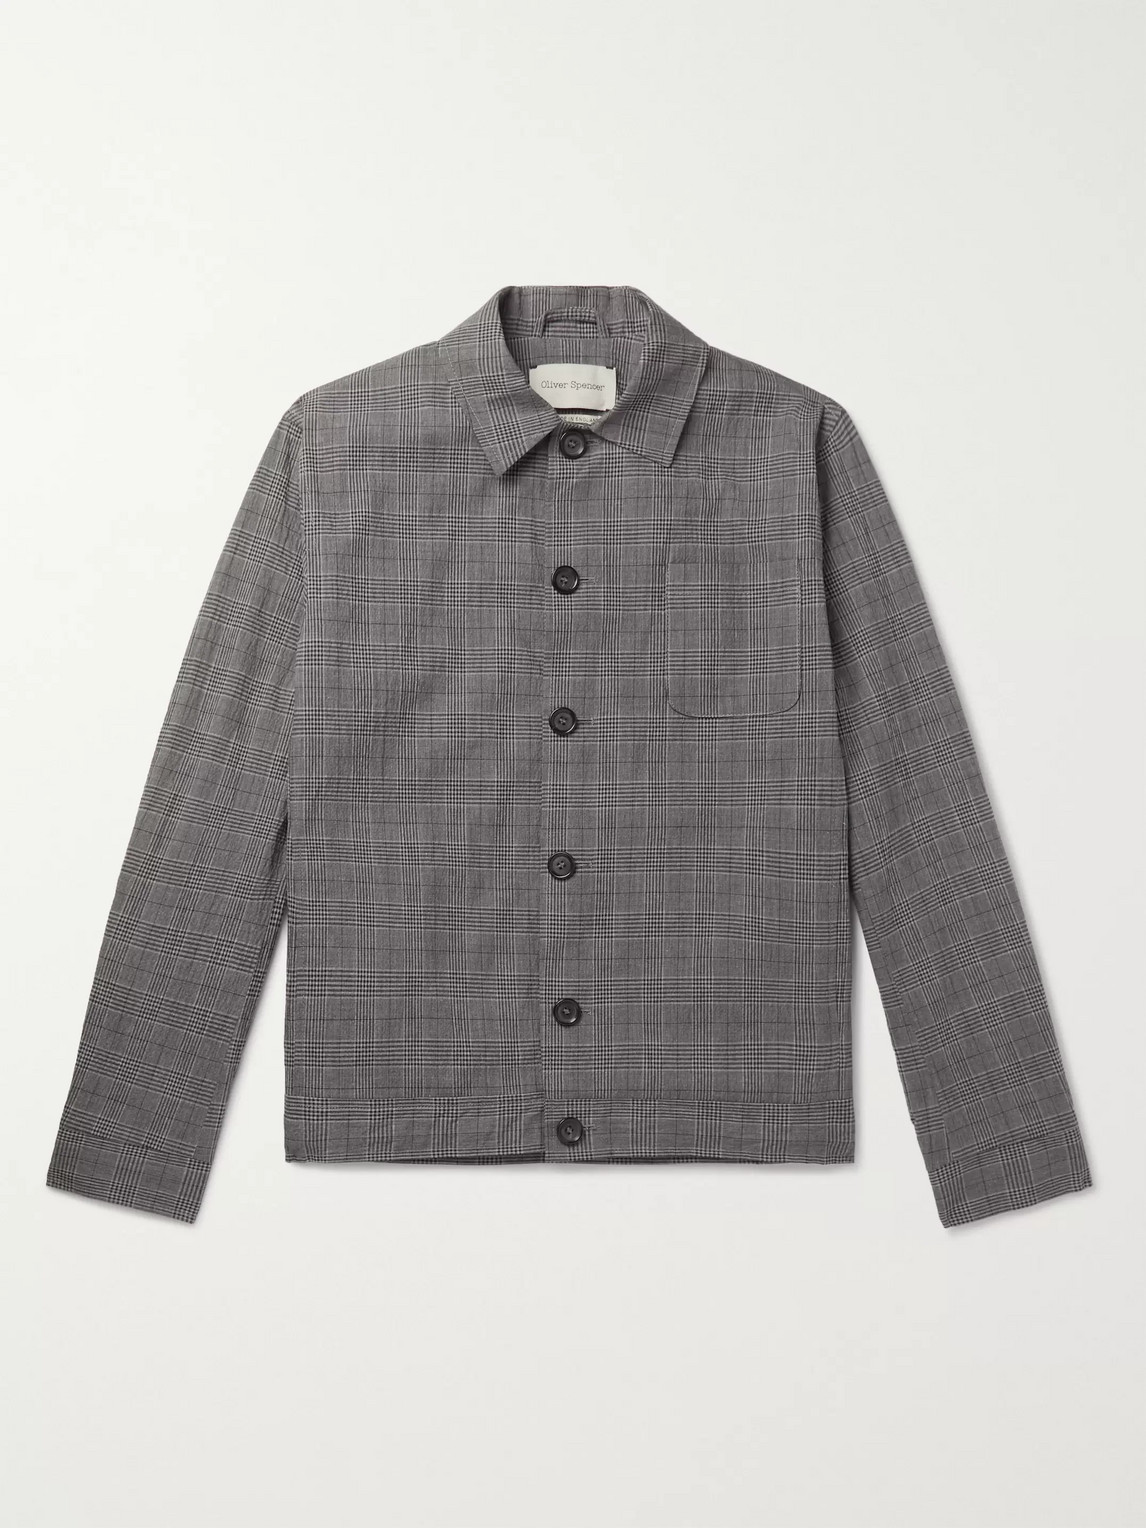 OLIVER SPENCER BUCKLAND PRINCE OF WALES CHECKED COTTON-BLEND JACKET